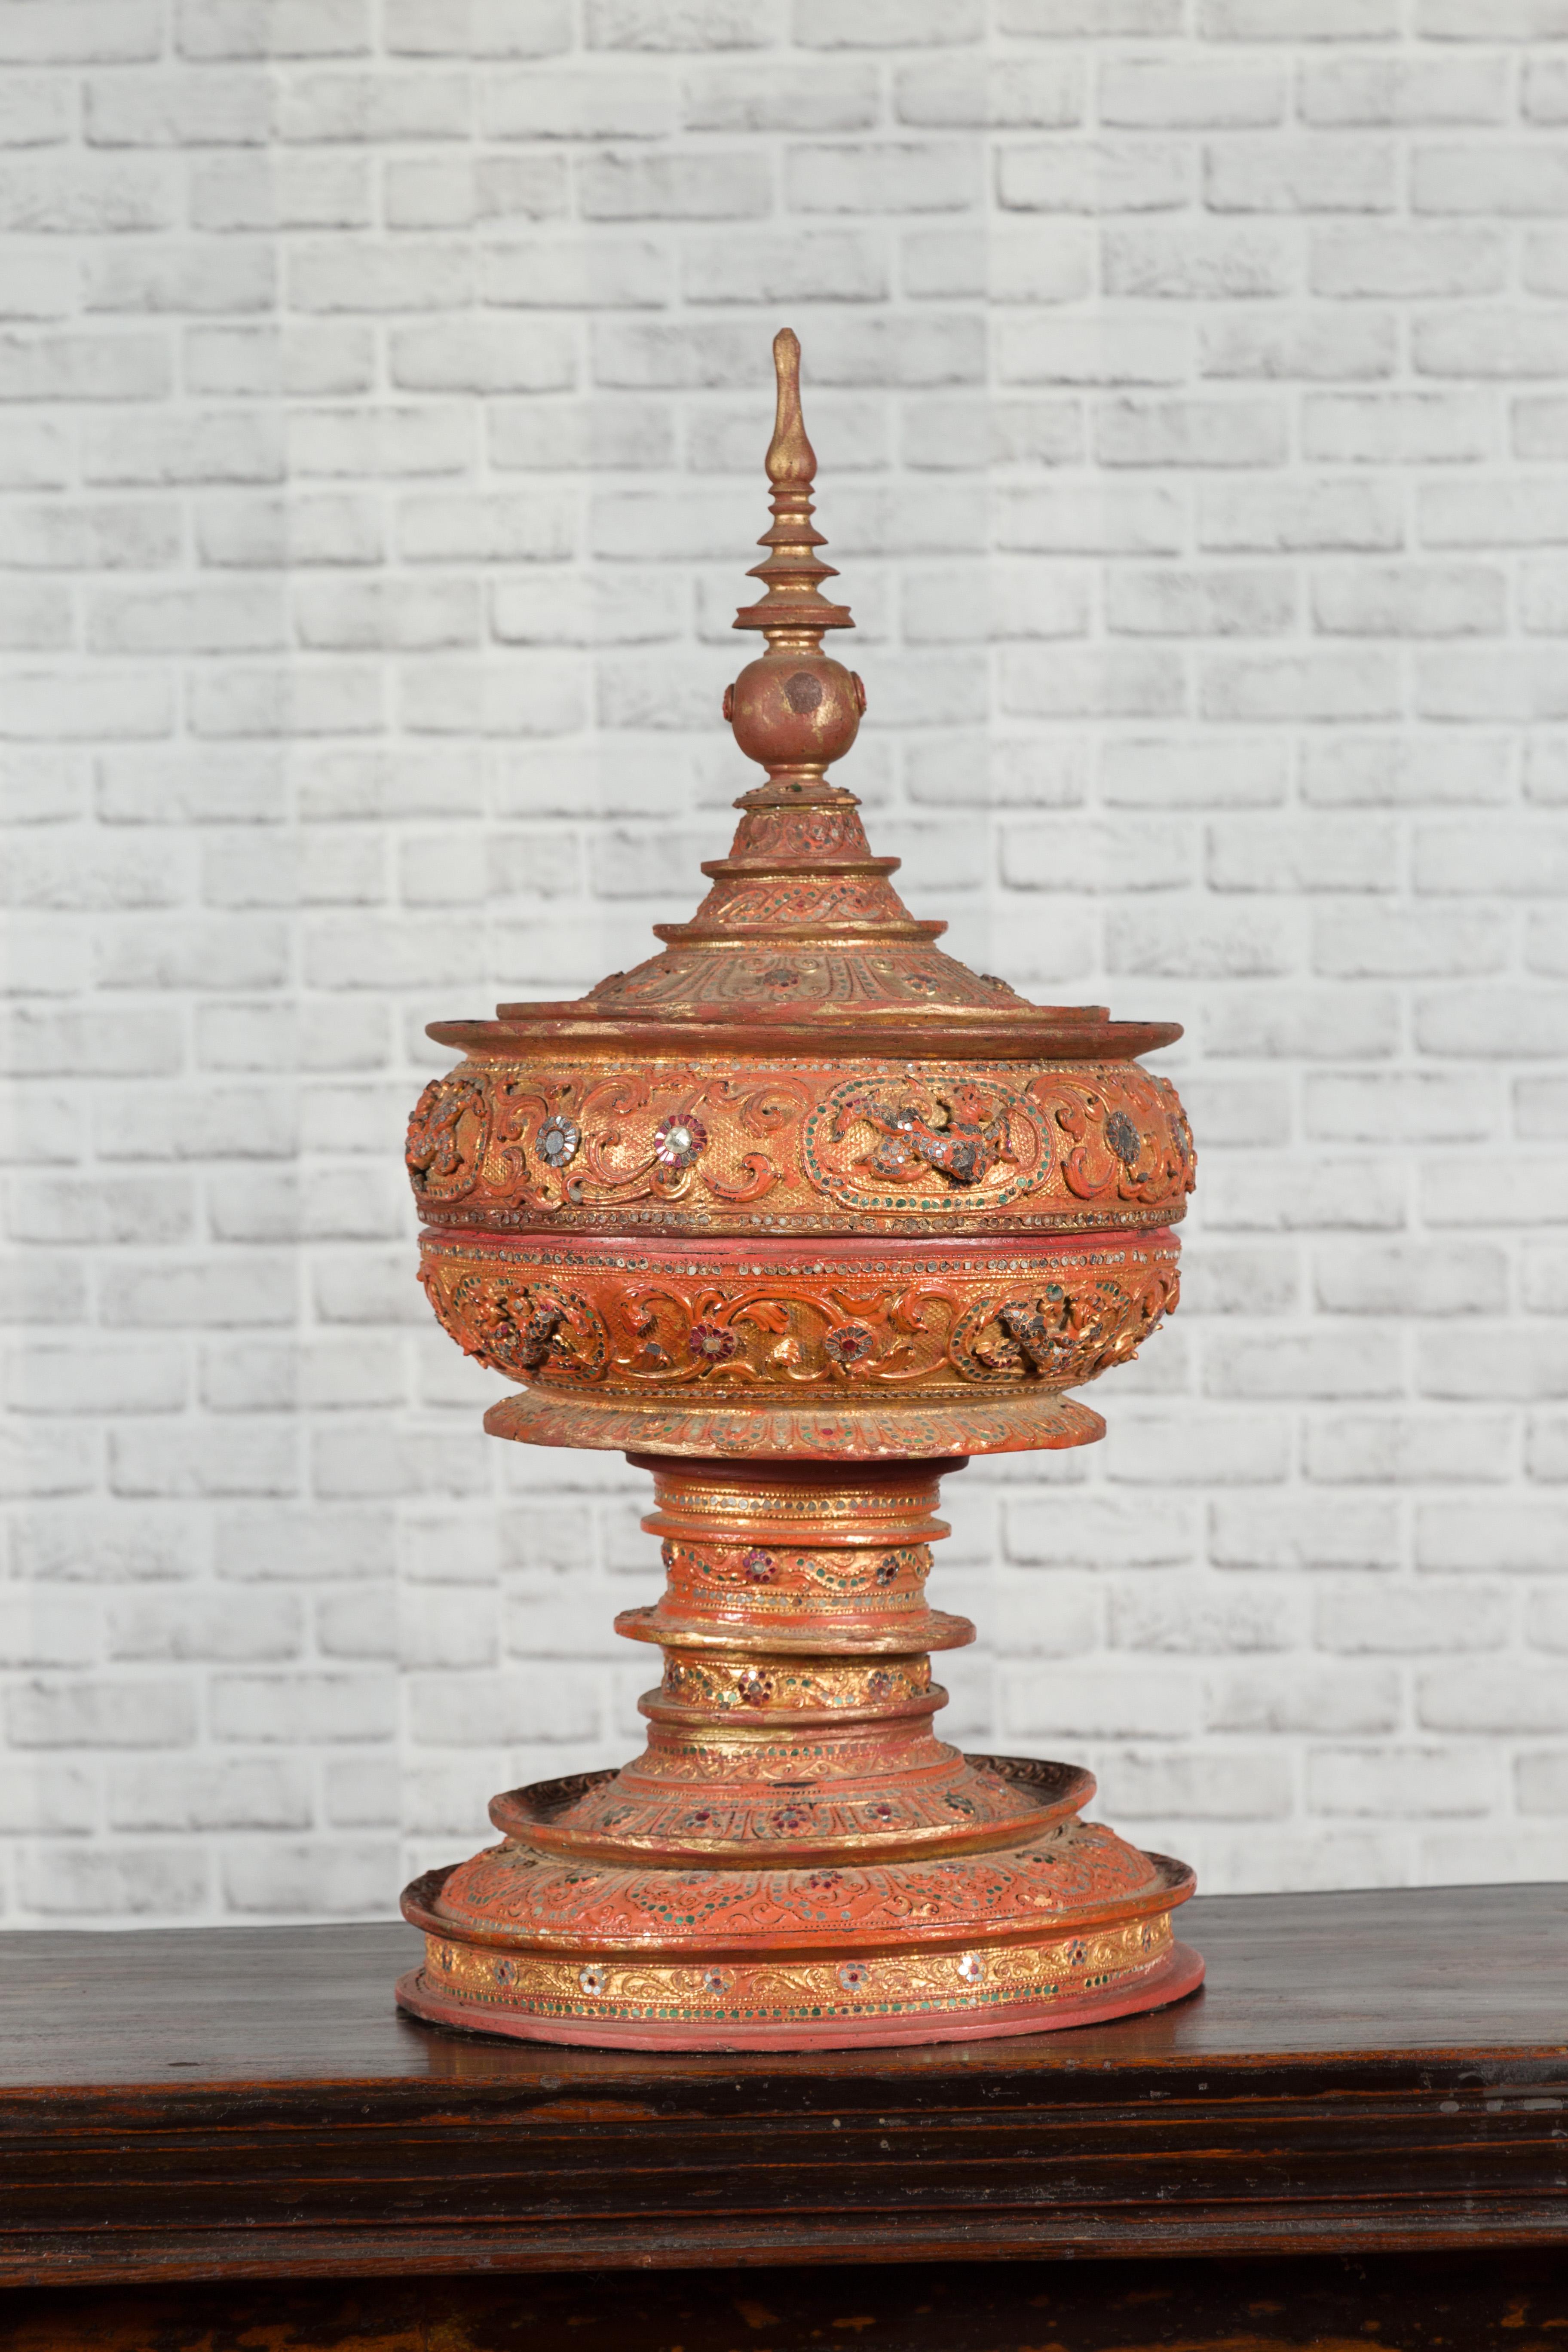 Antique Burmese Carved Teak Lidded Offering Bowl with Inlaid and Gilt Decor 13